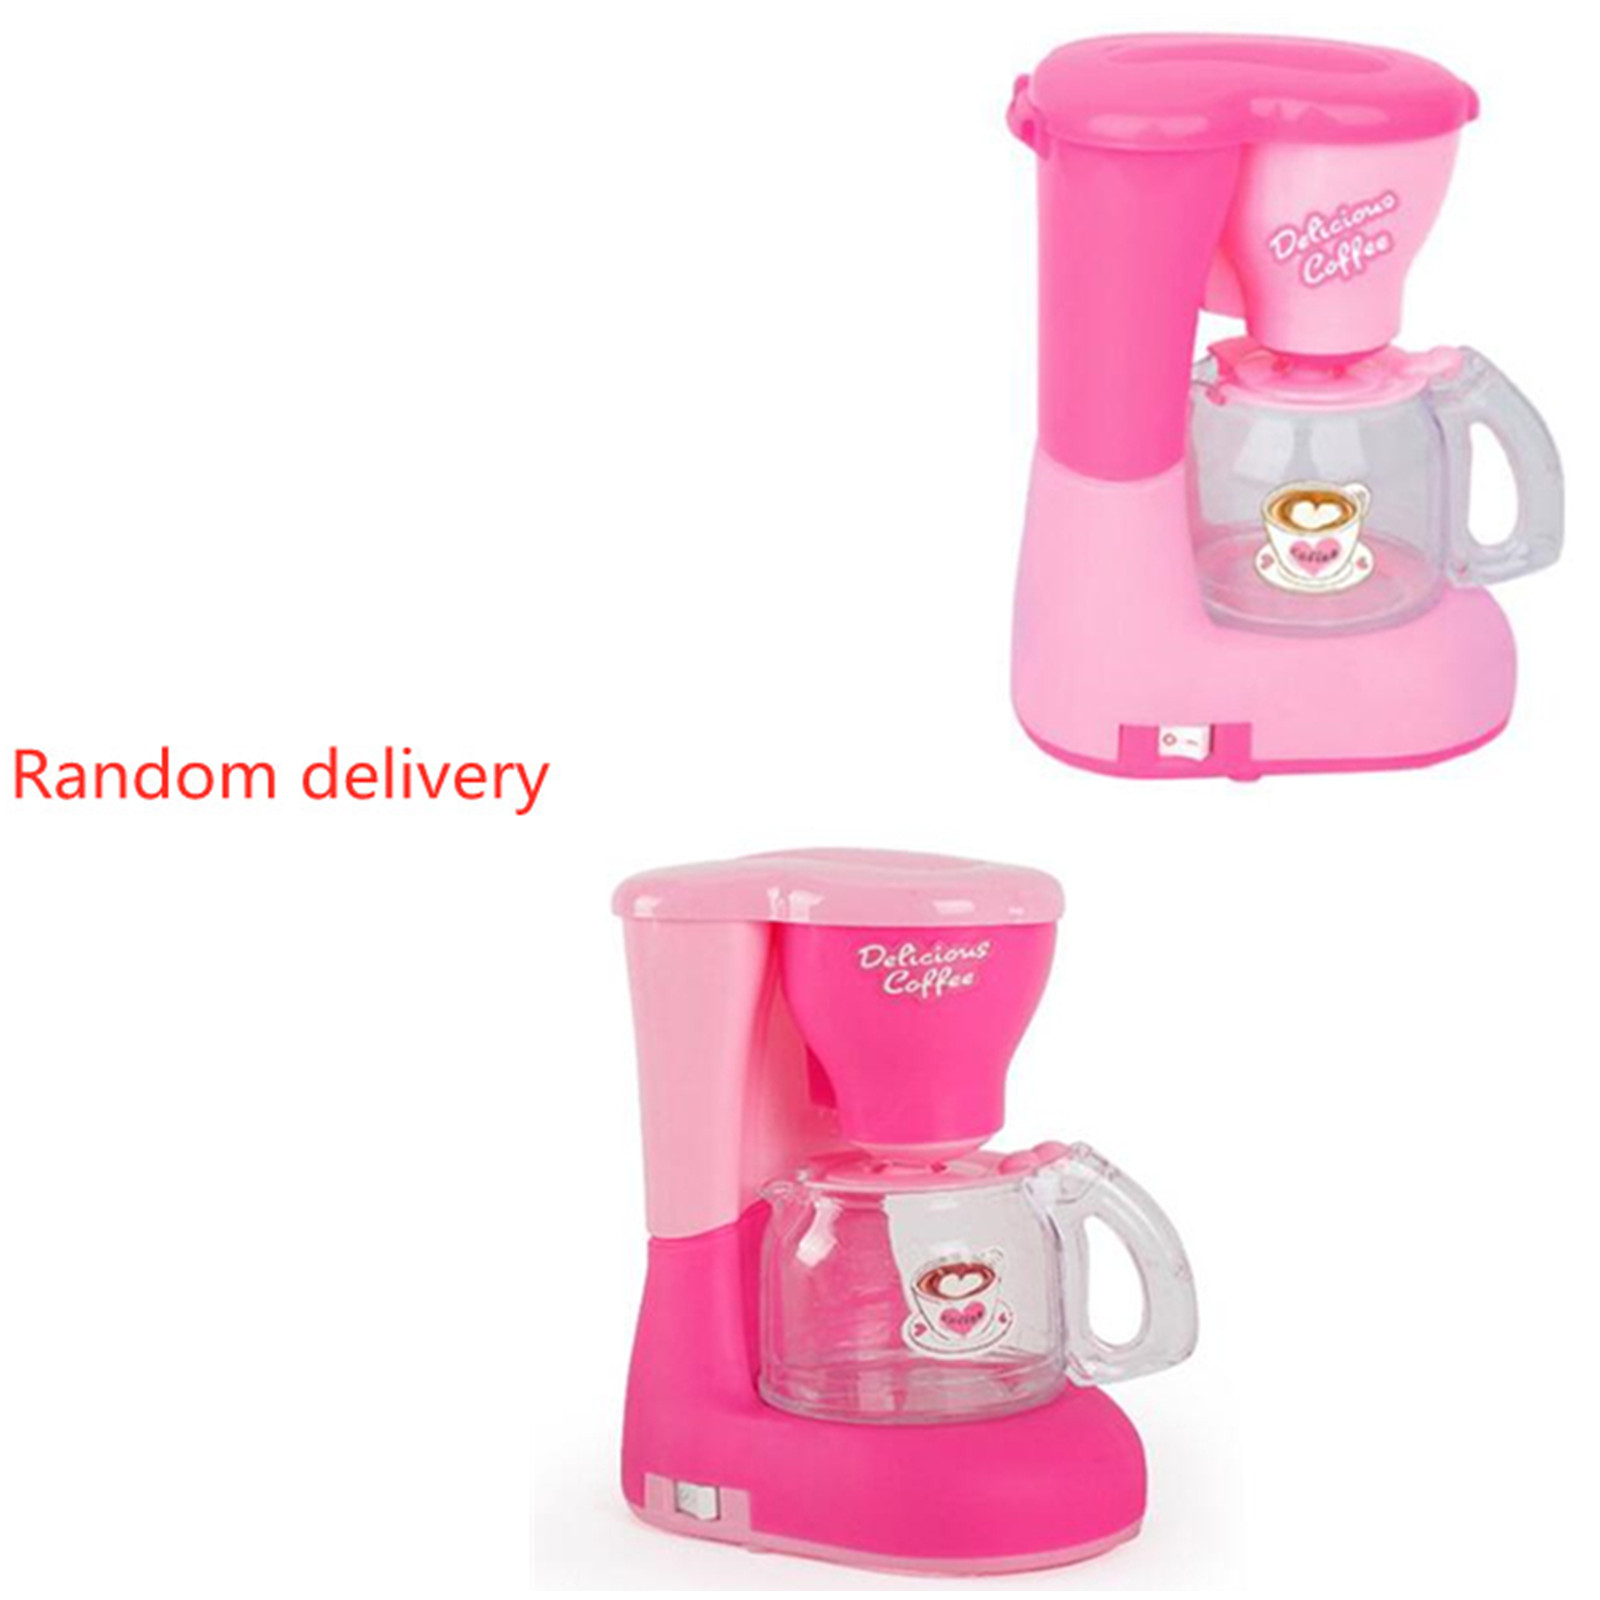 Mini Toys Simulation Home Appliances For Kids Kitchen, Girls Pretend Play  Toy - Meat Grinder (3 Aa Batteries Required)